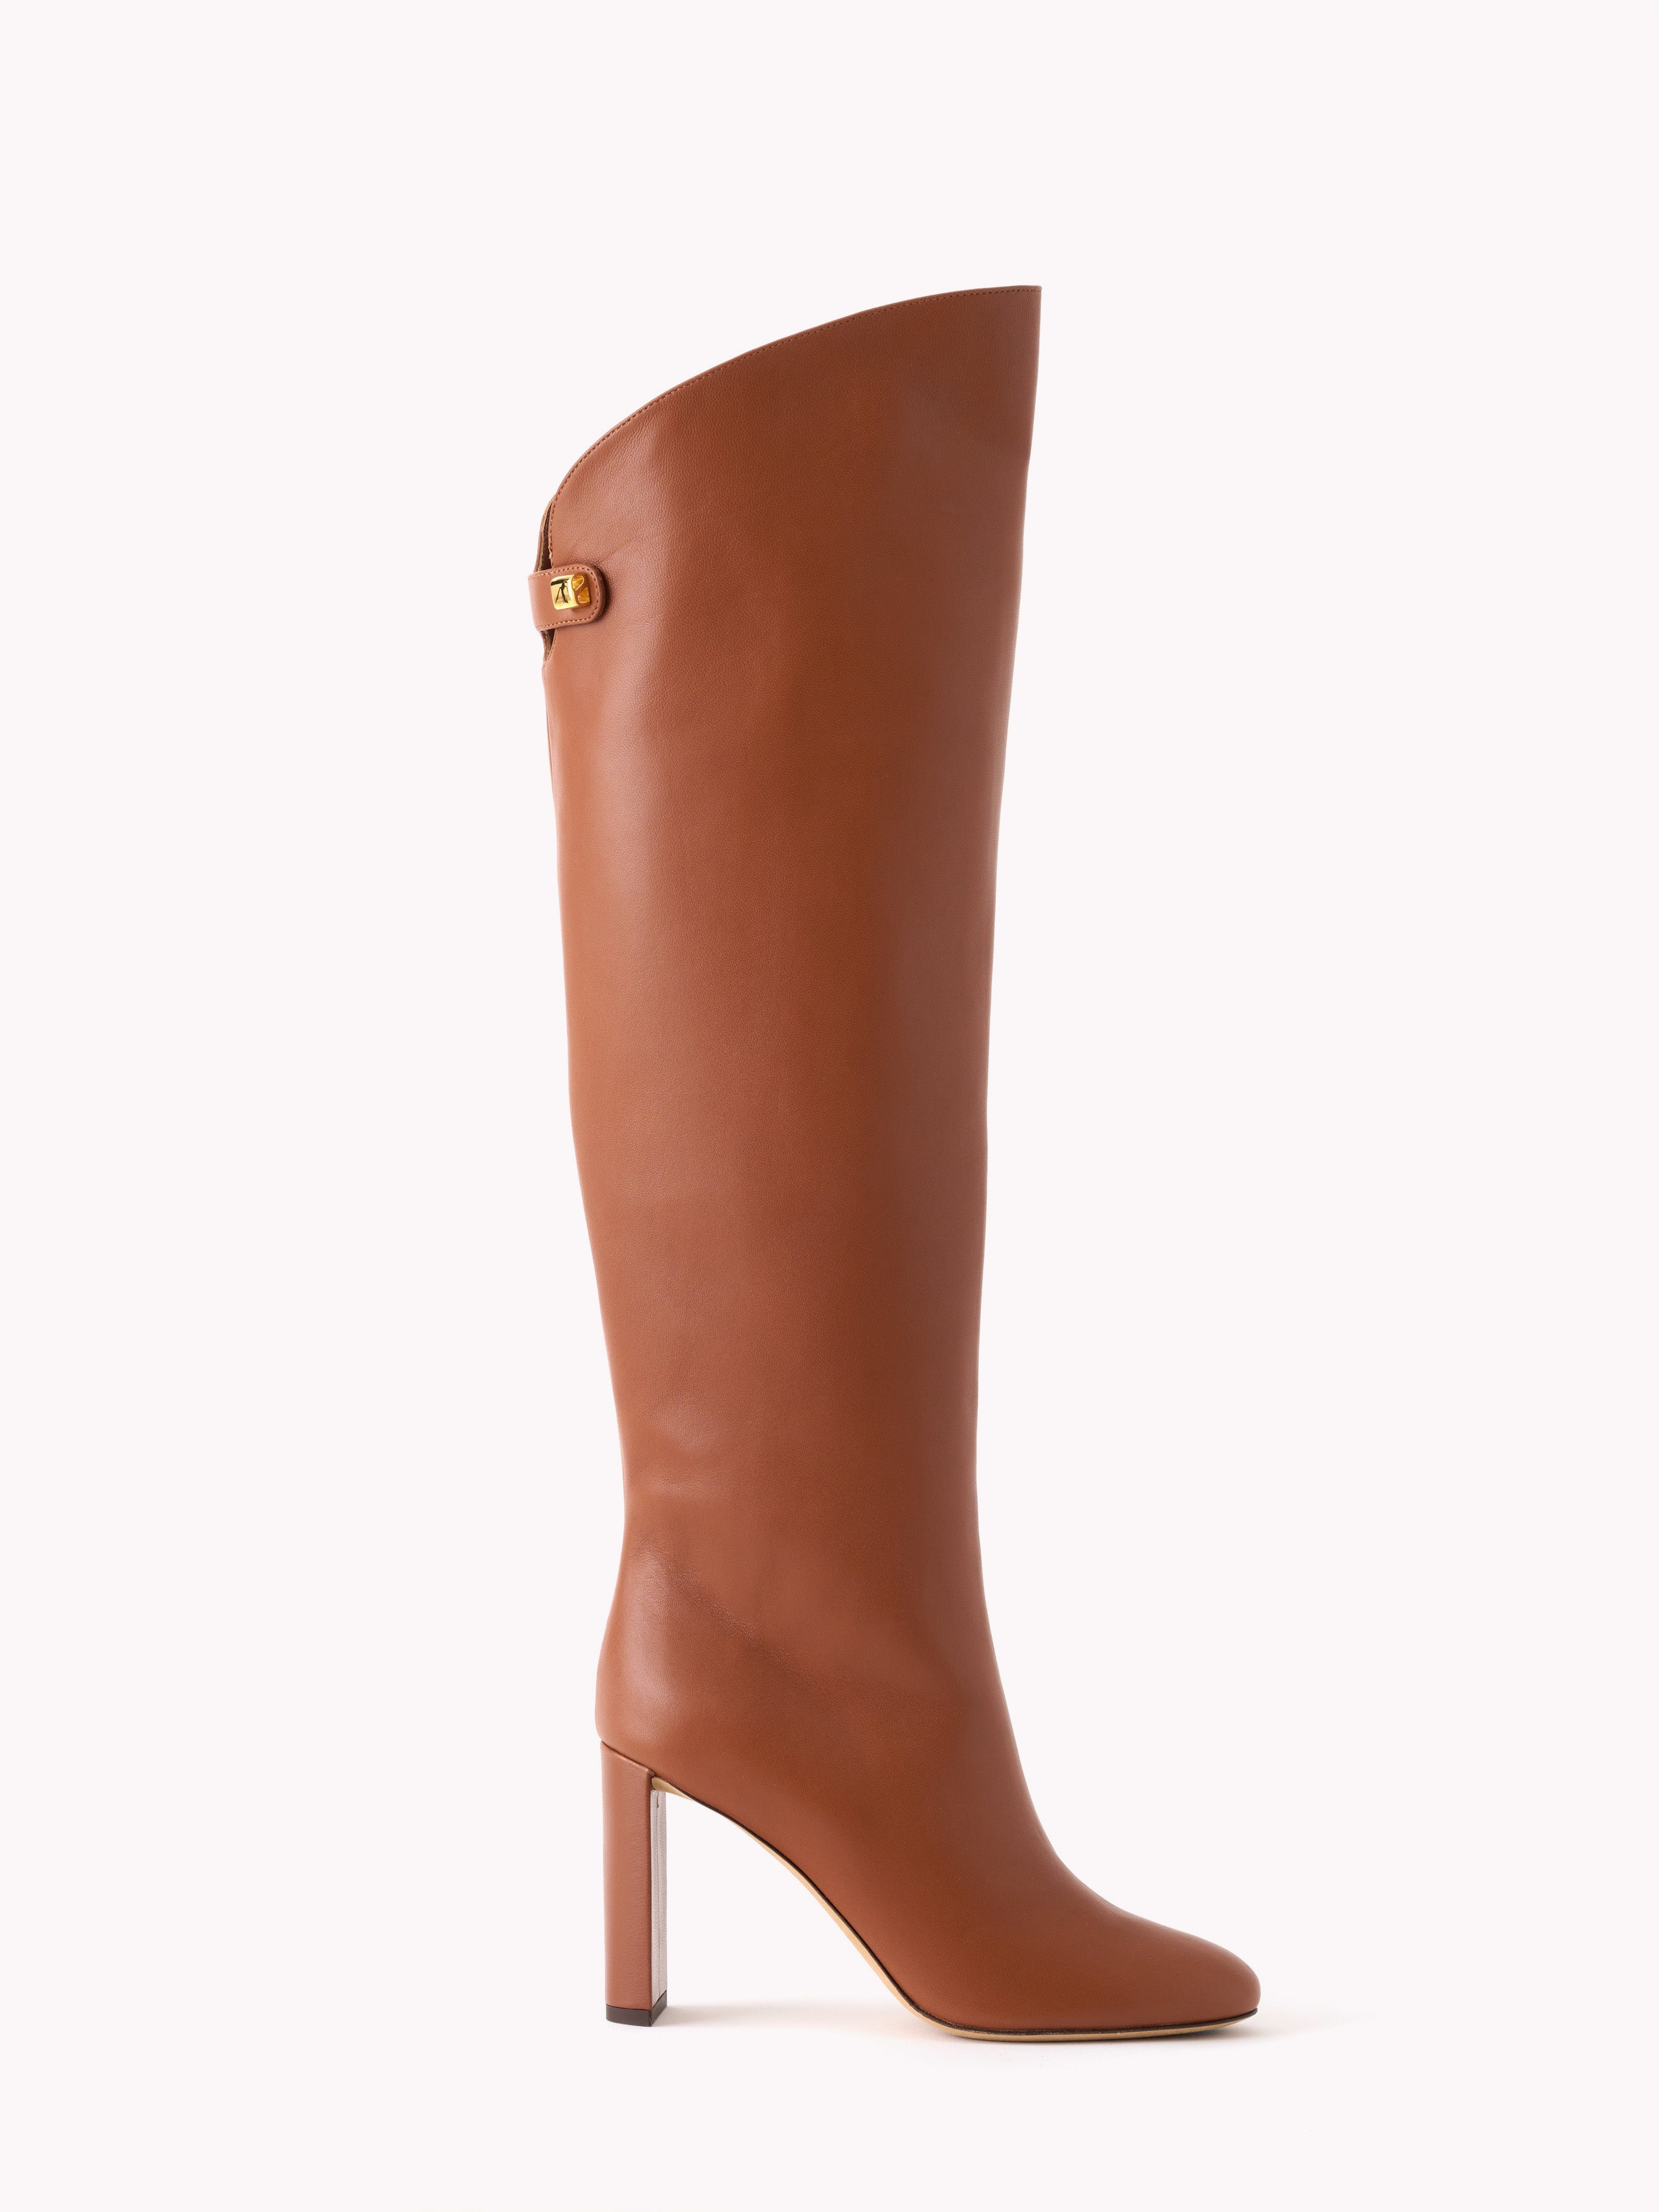 luxury cognac high leather boots with comfortable high heels skorpios